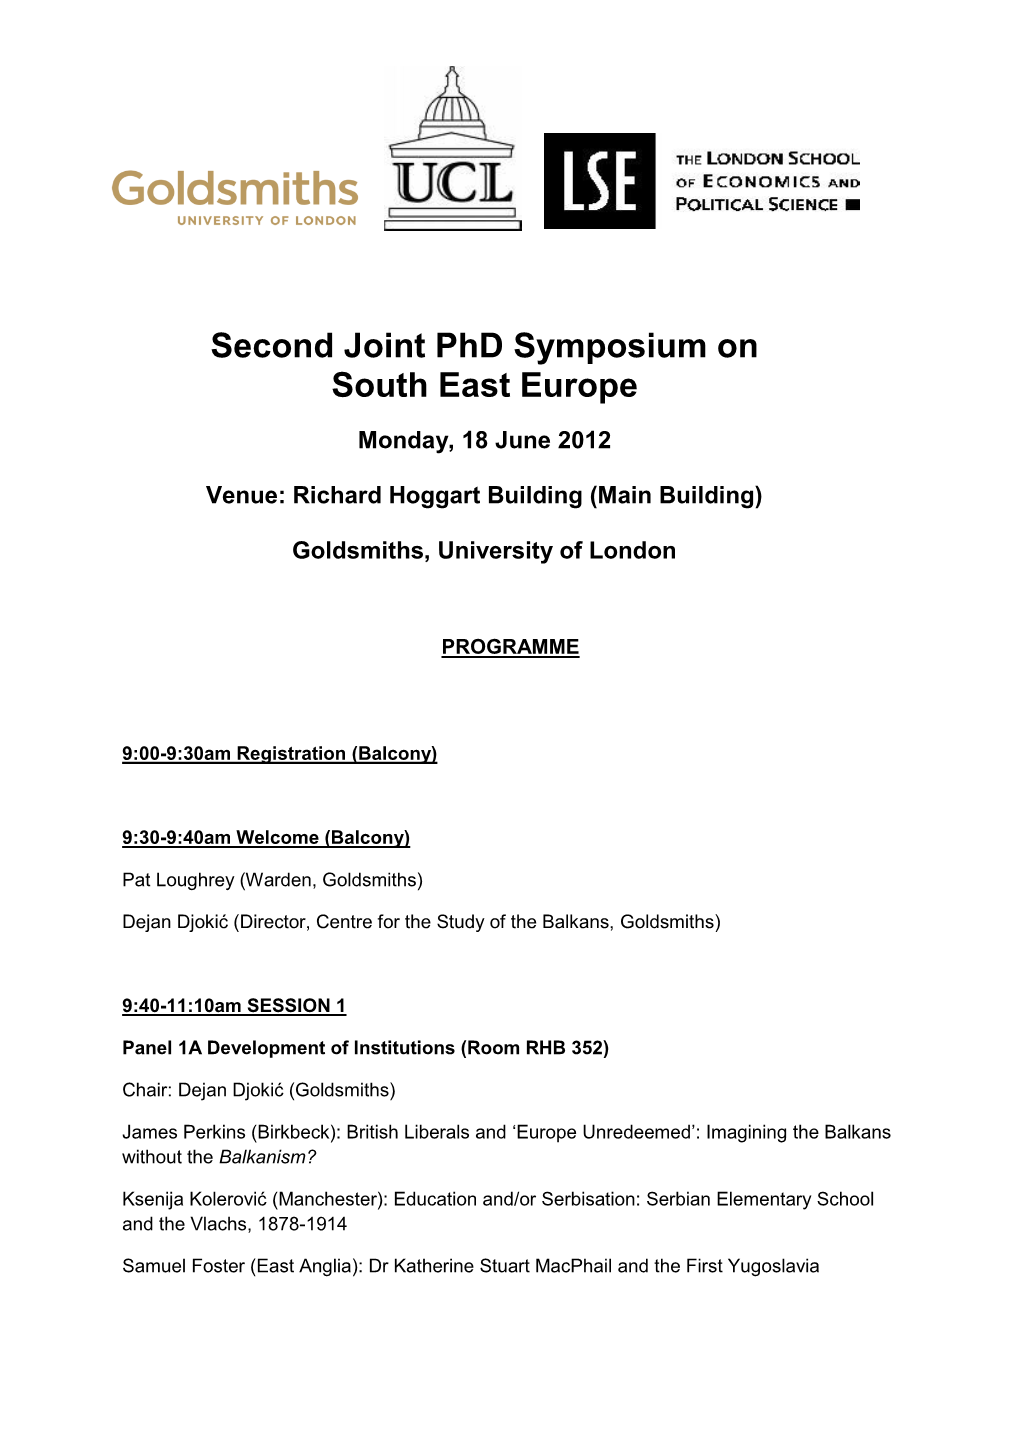 Second Joint Phd Symposium on South East Europe